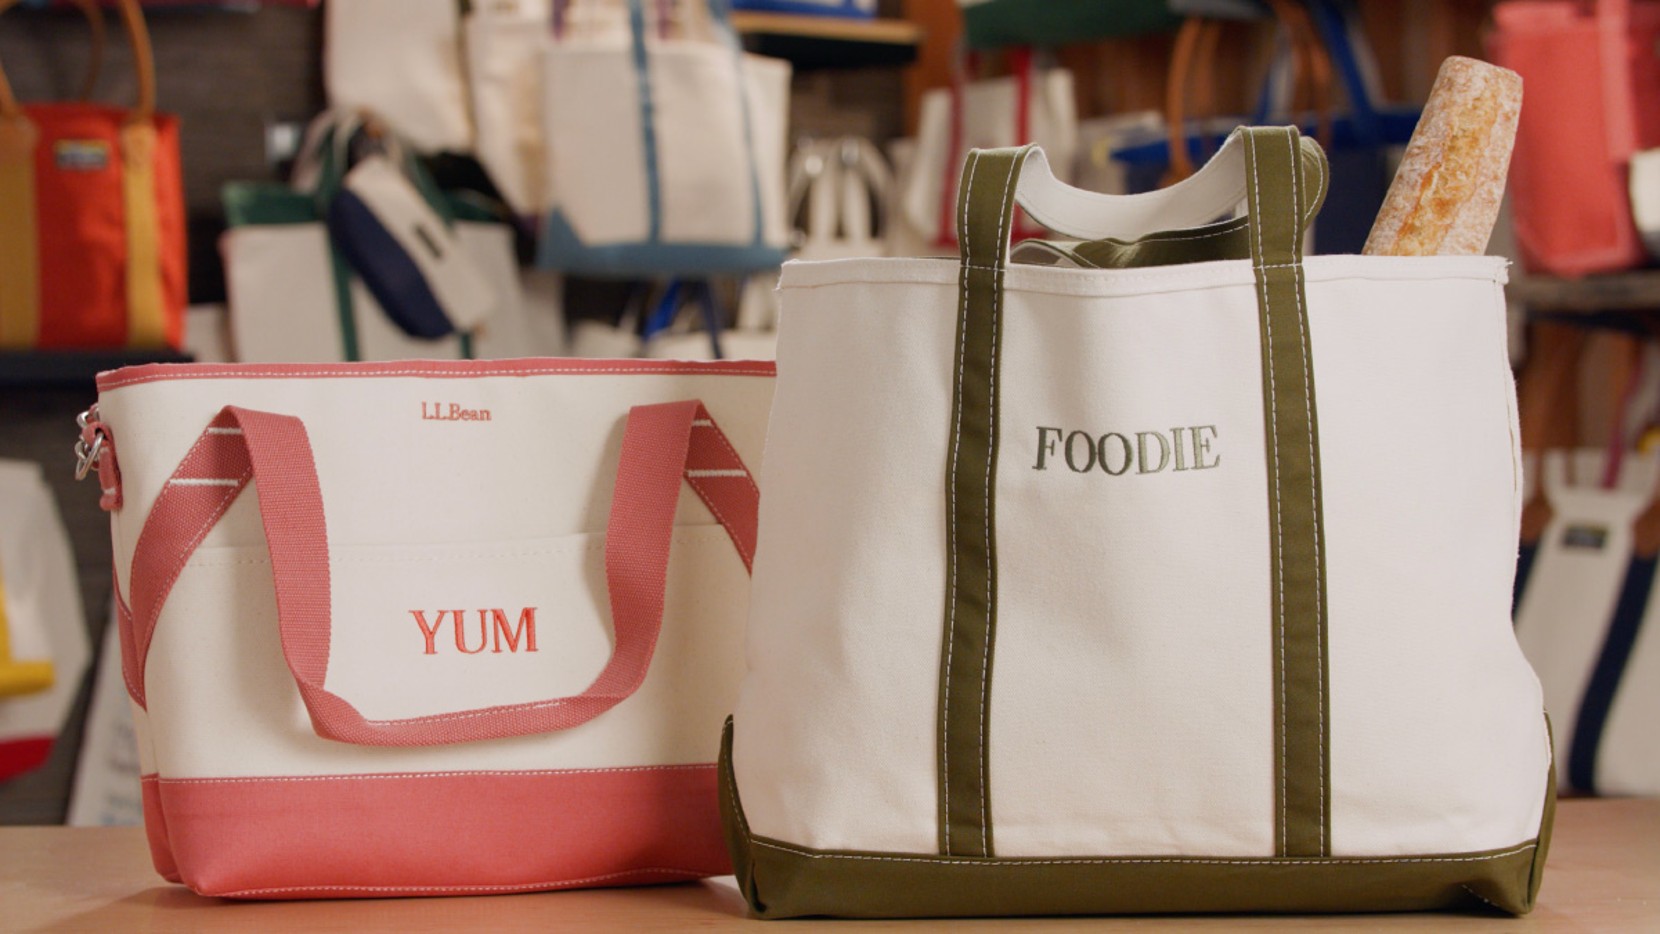 A large Boat & Tote with olive handles and monogram - "FOODIE", and an insulated tote with reddish handles and monogram - "YUM"